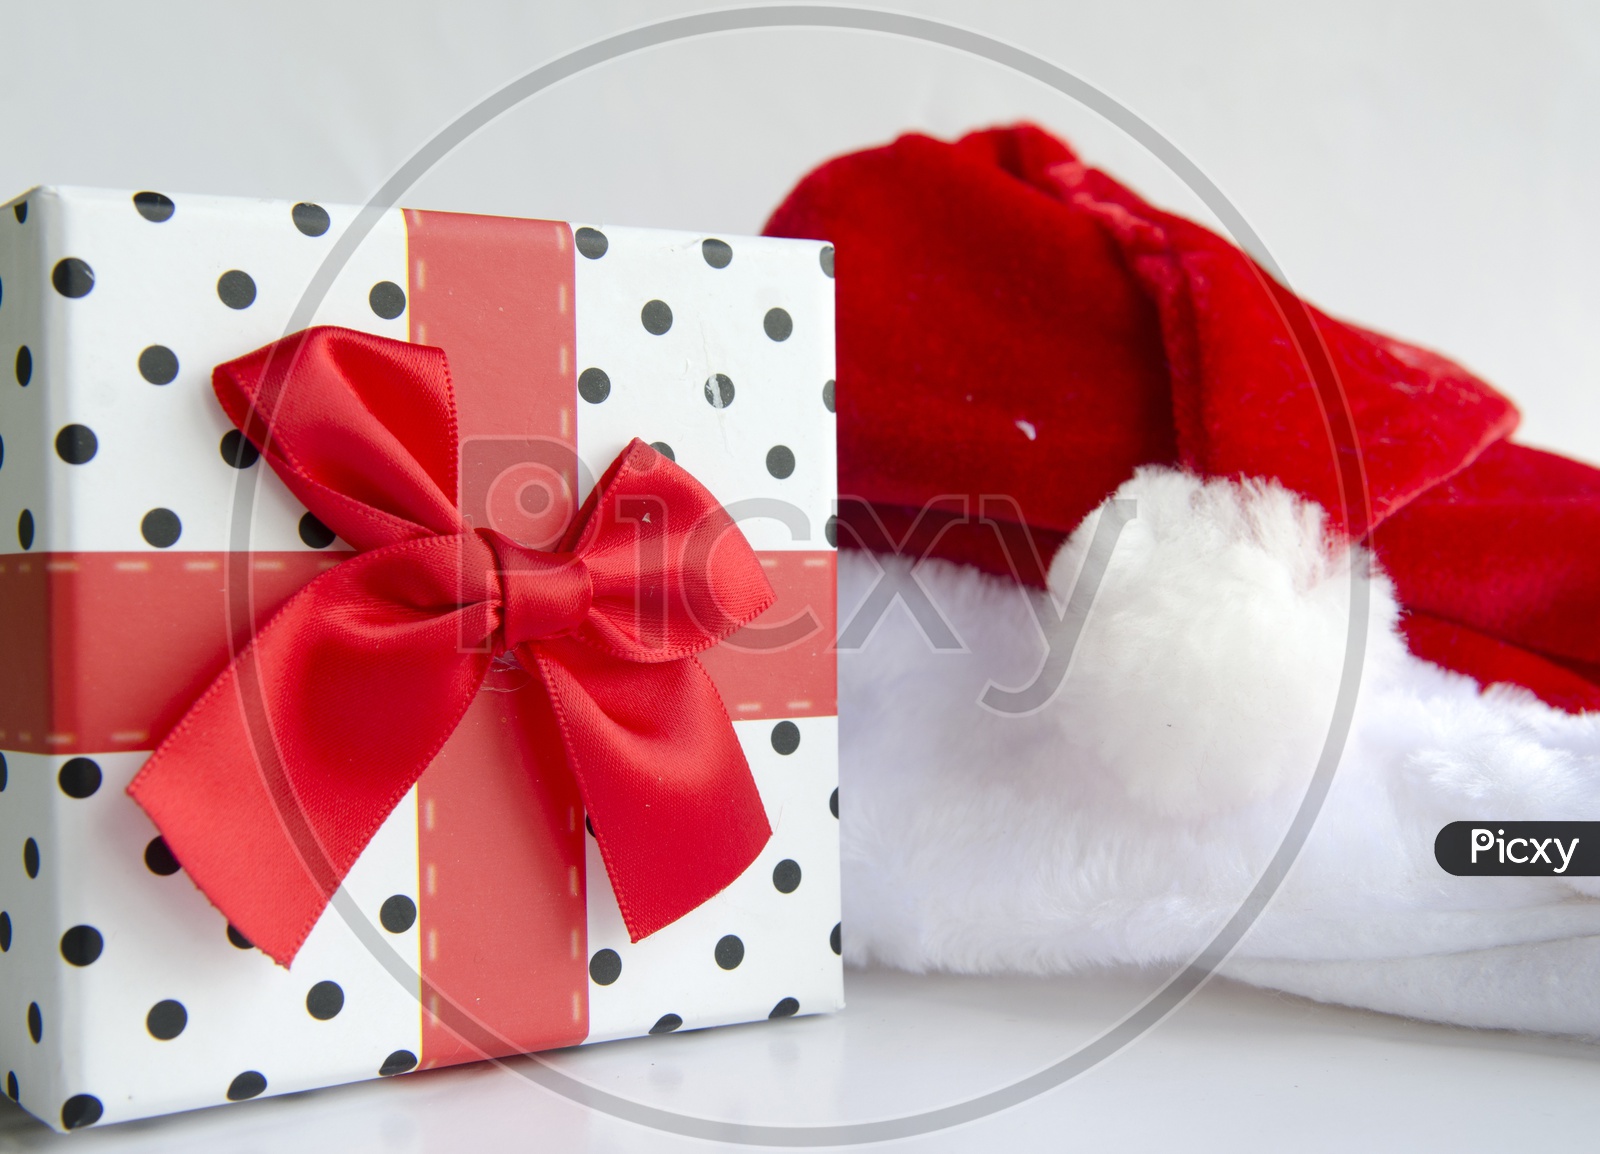 Santa Cap  with Gift Box For Christmas On an Isolated White Background